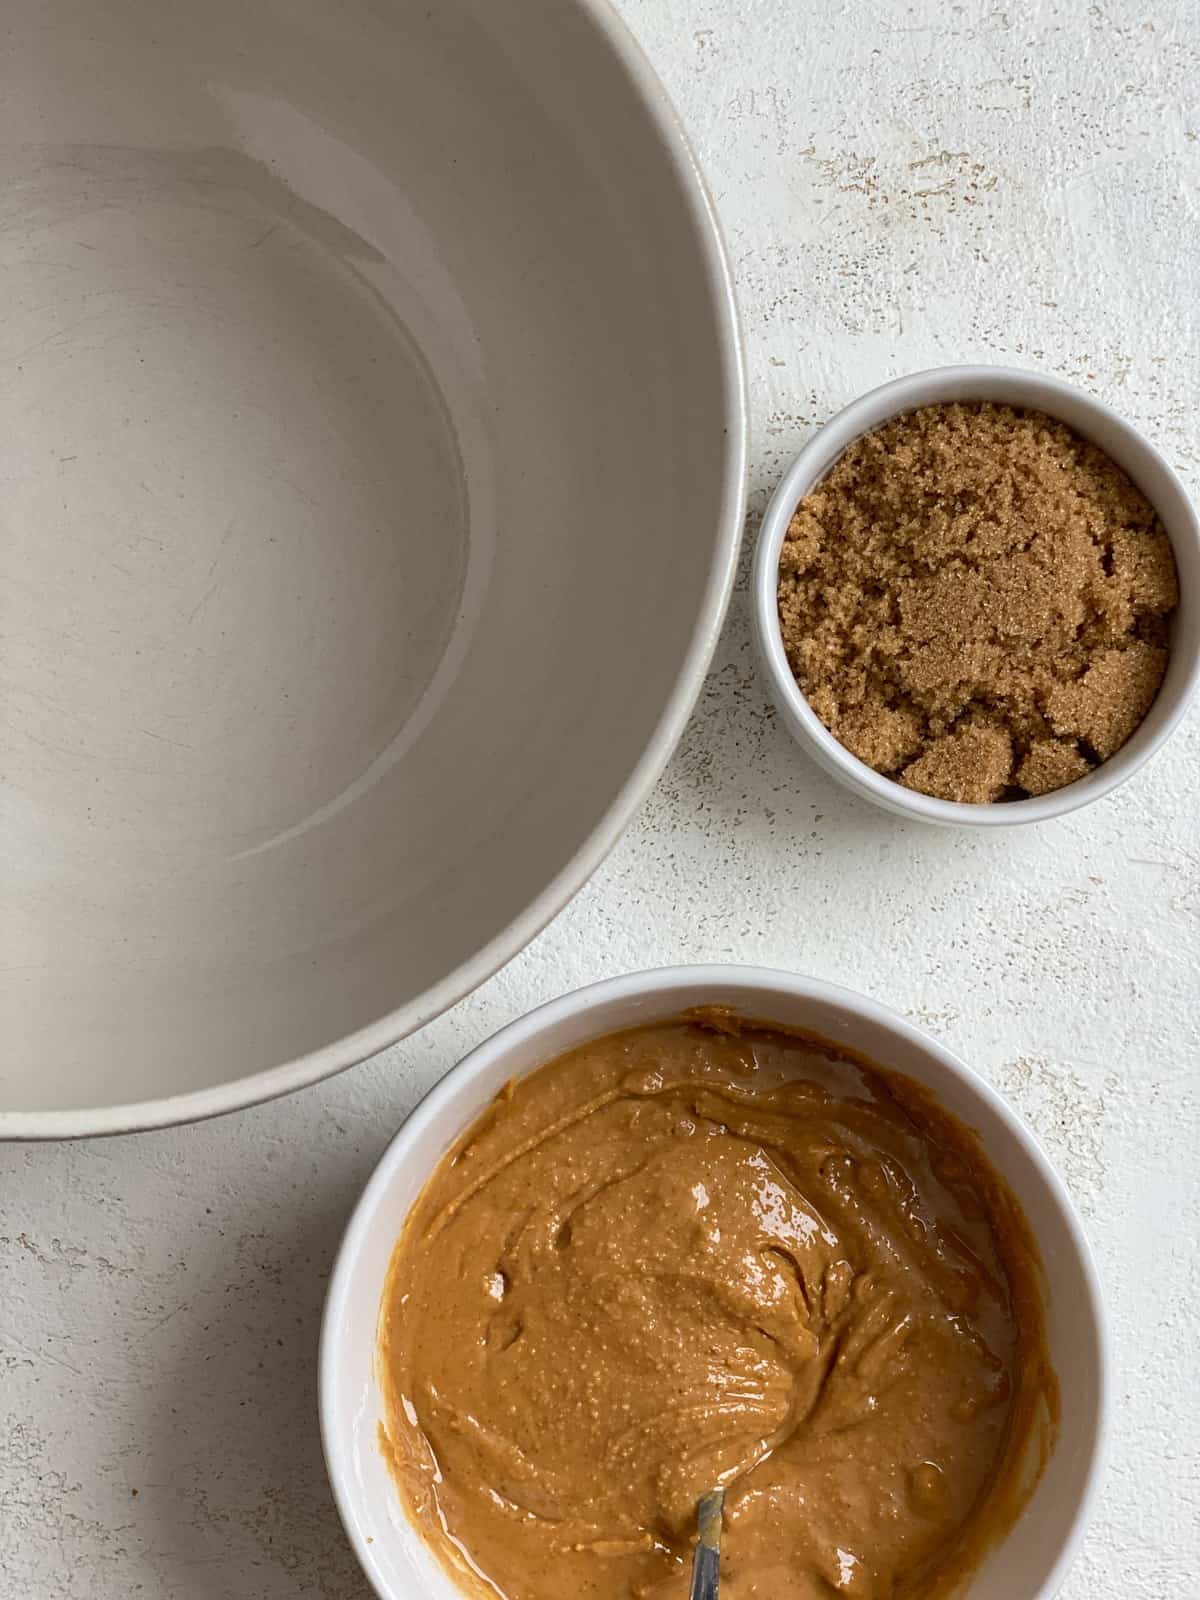 ingredients for Vegan Peanut Butter Cookies [With Filling| Sandwich Cookies] measured out a،nst a white background